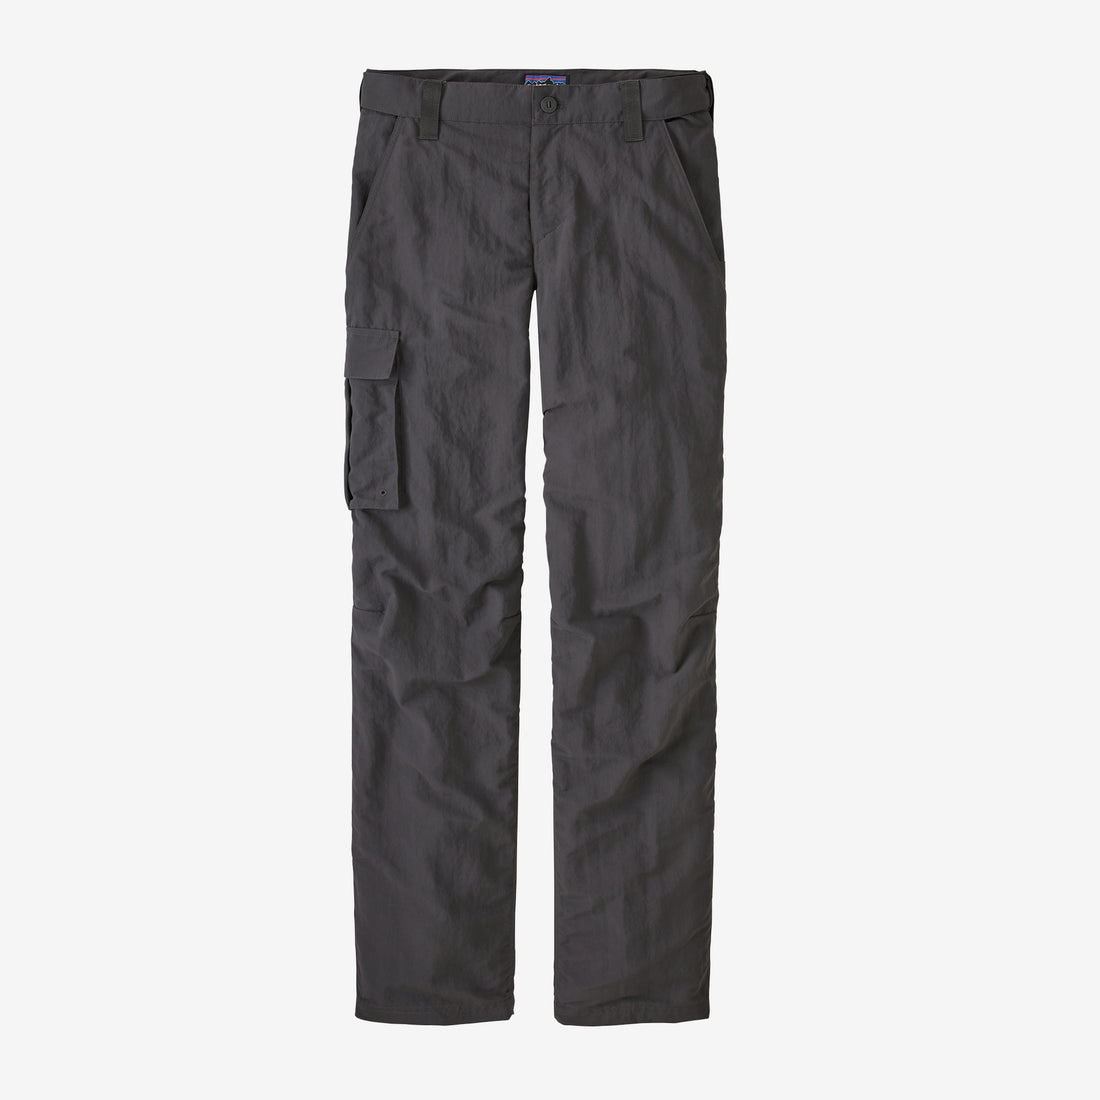 Patagonia Swiftcurrent Wet Wade Pants- Short Forge Grey